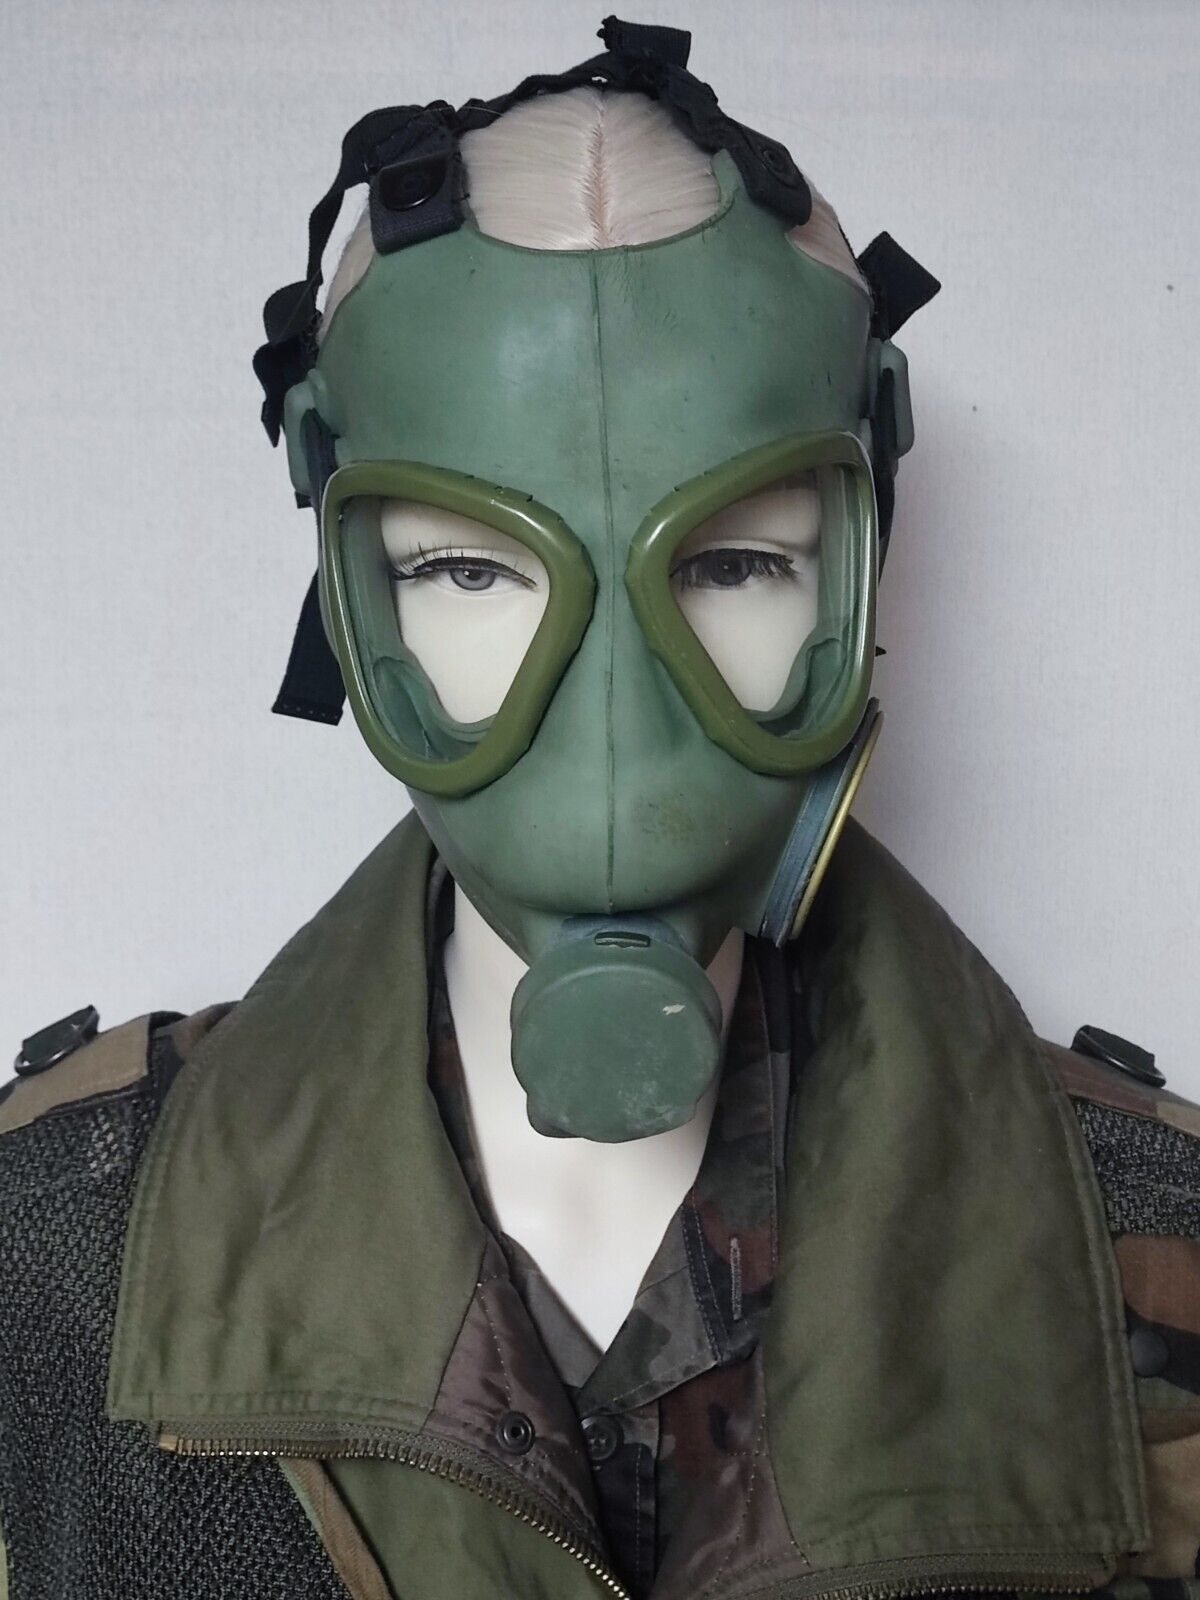 M1 M59 NBC Gas Mask - Full MC1 Kit with 60mm filter canister, JNA Yugoslavia